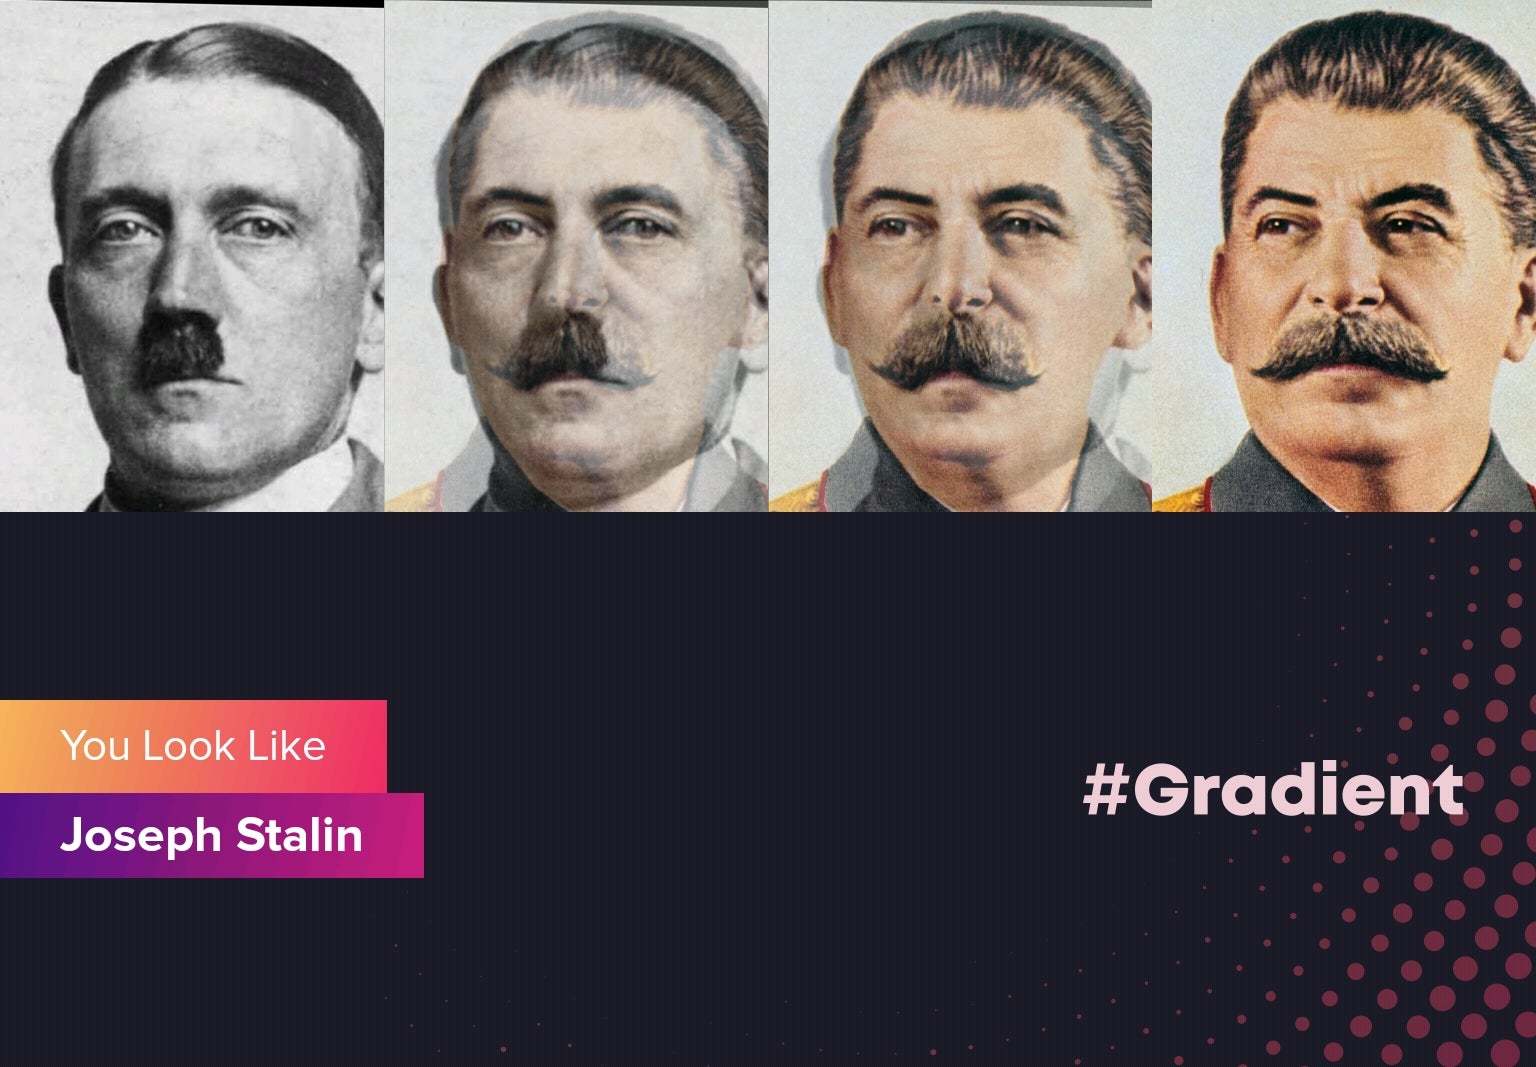 THIS MEME WAS BROUGHT TO YOU BY NAZBOL GANG